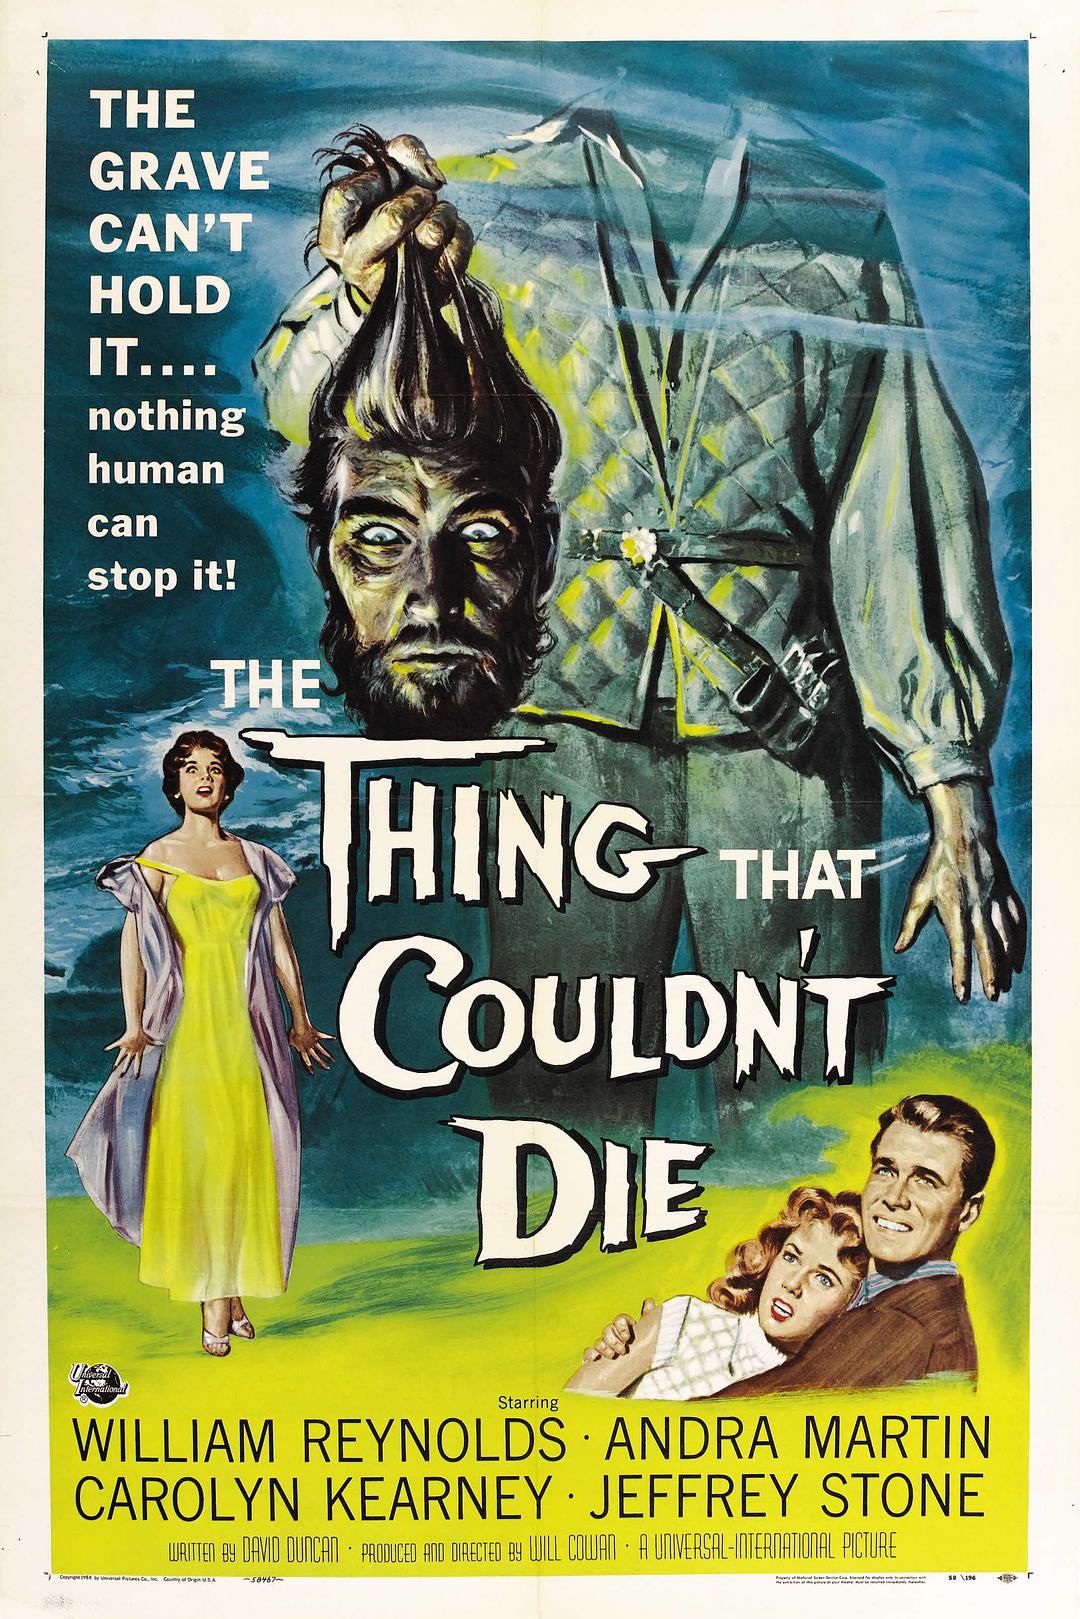  The.Thing.That.Couldnt.Die.1958.1080p.BluRay.x264.DTS-FGT 6.30GB-1.jpeg